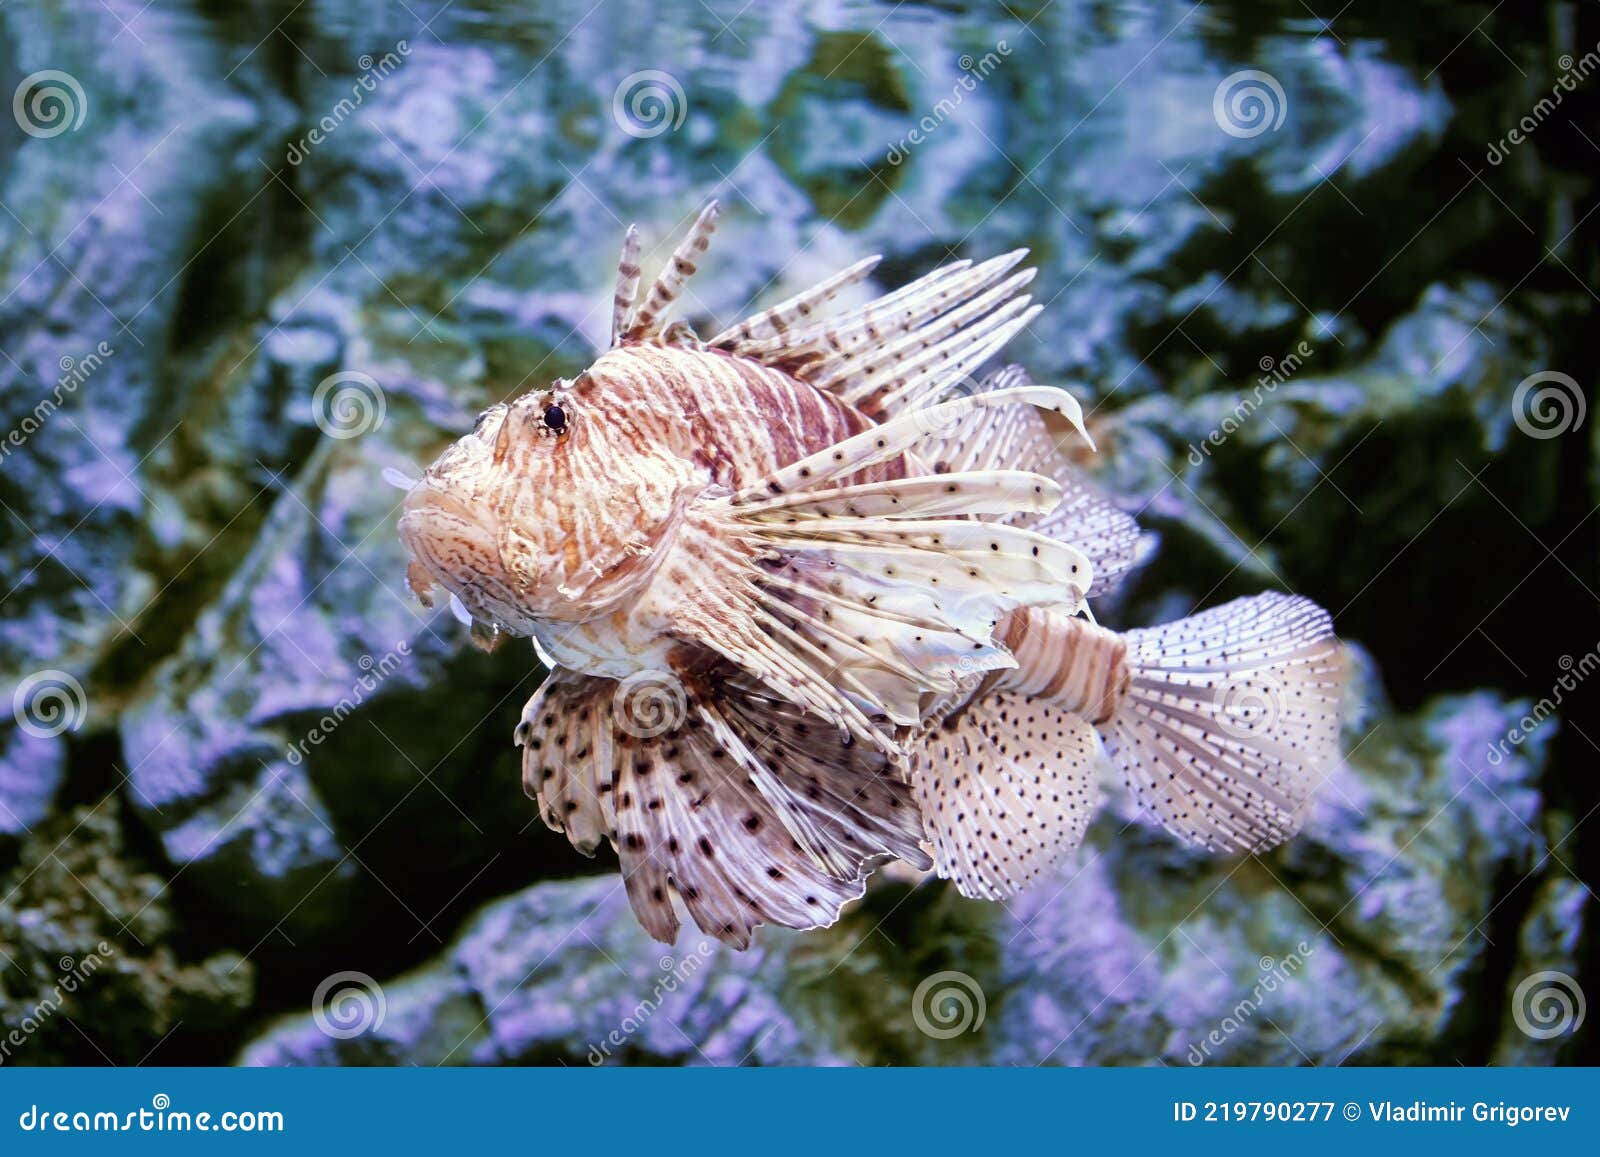 Toxic Fish Lionfish Can only Release Venom when Something Strikes Its  Spines. Stock Image - Image of volitans, envenomation: 219790277